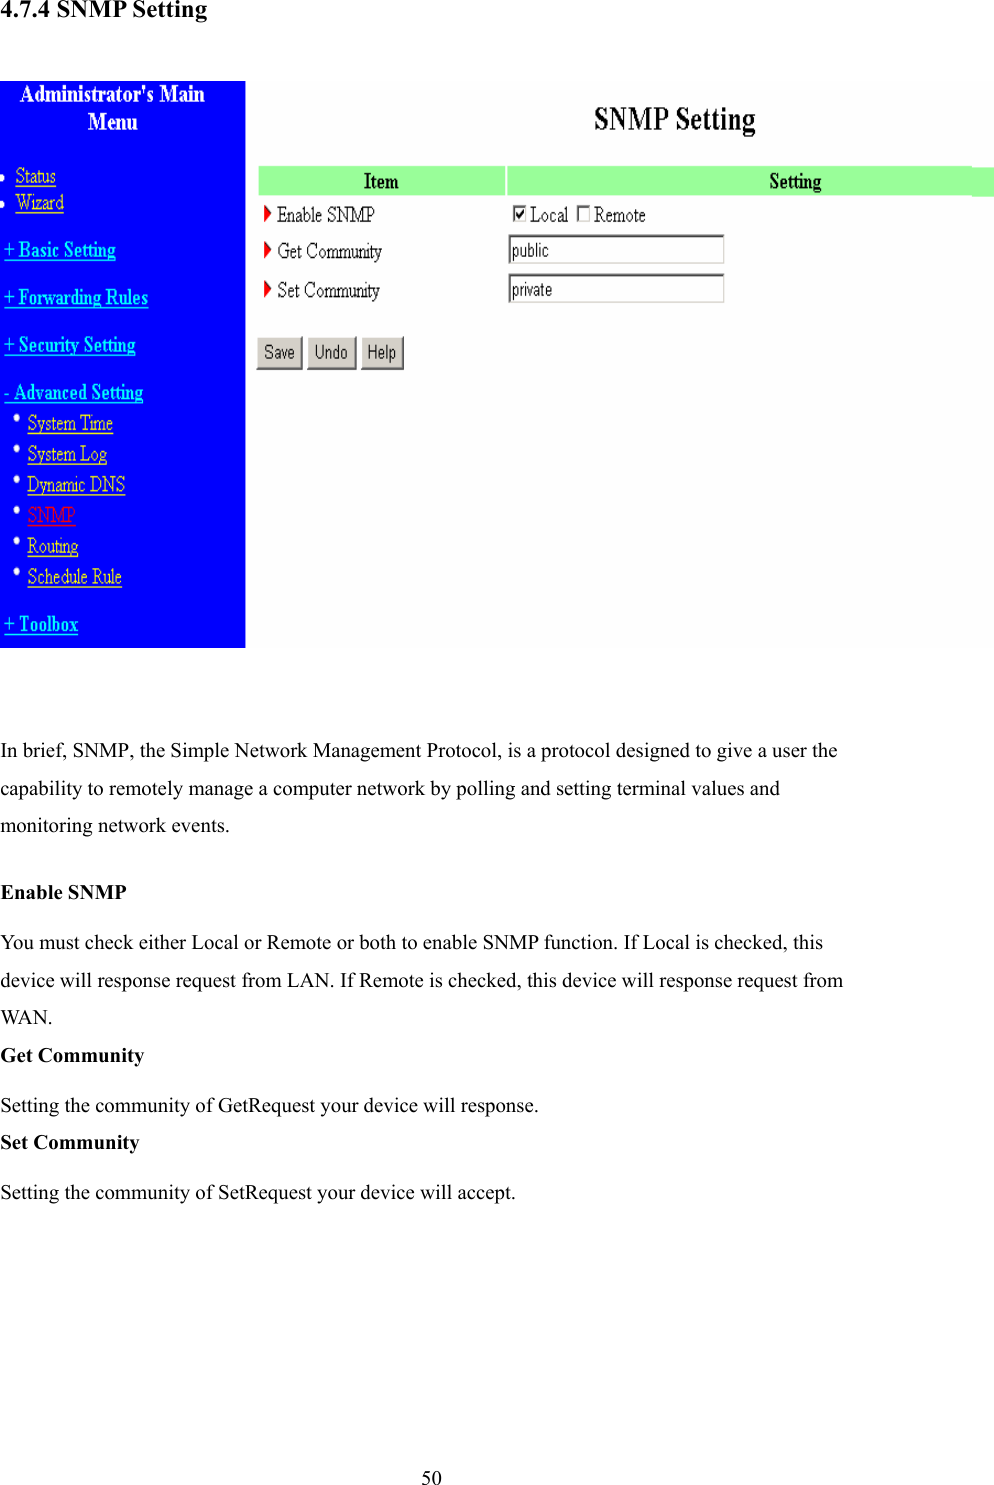  504.7.4 SNMP Setting   In brief, SNMP, the Simple Network Management Protocol, is a protocol designed to give a user the capability to remotely manage a computer network by polling and setting terminal values and monitoring network events.   Enable SNMP You must check either Local or Remote or both to enable SNMP function. If Local is checked, this device will response request from LAN. If Remote is checked, this device will response request from WA N .   Get Community Setting the community of GetRequest your device will response.   Set Community Setting the community of SetRequest your device will accept.   